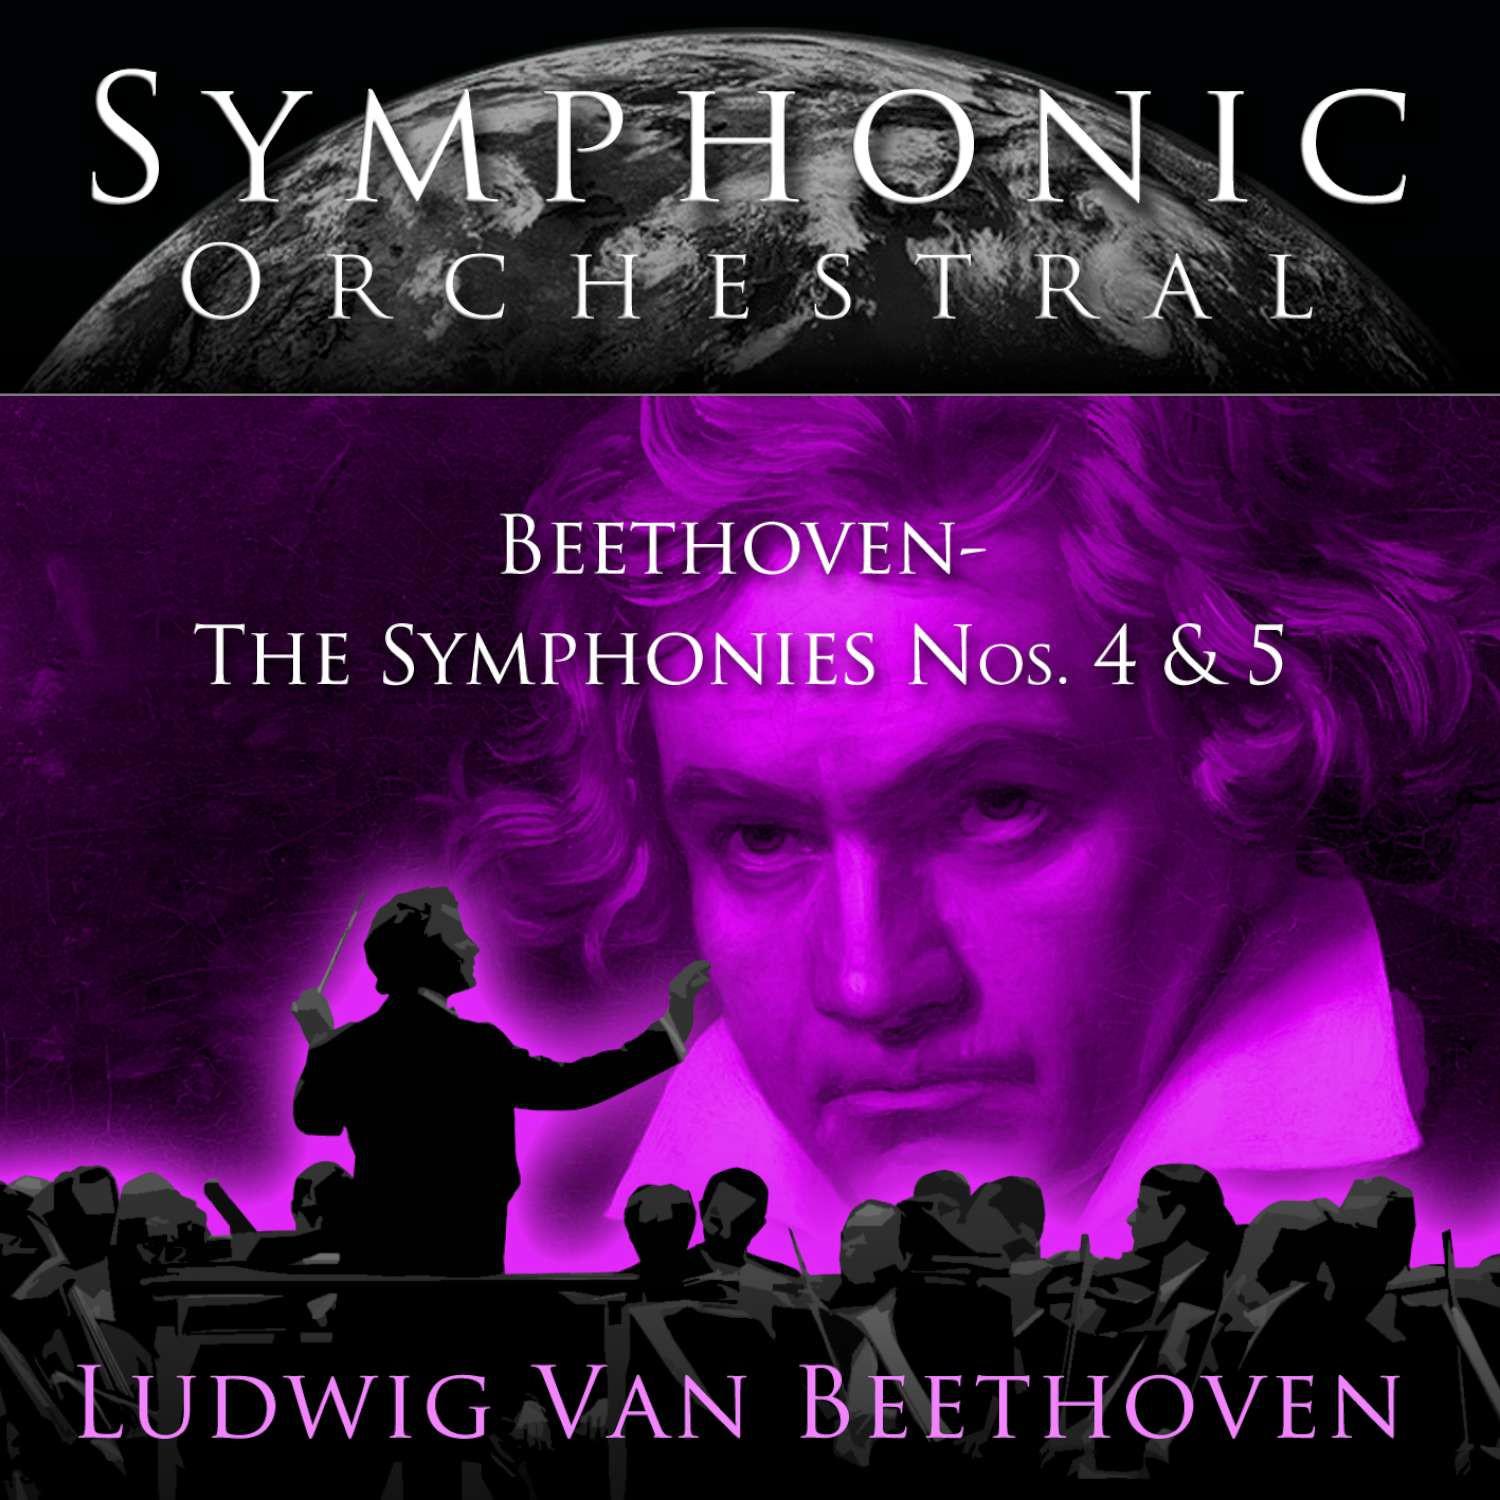 Symphonic Orchestral - Beethoven: The Symphonies No.s 5 and 4